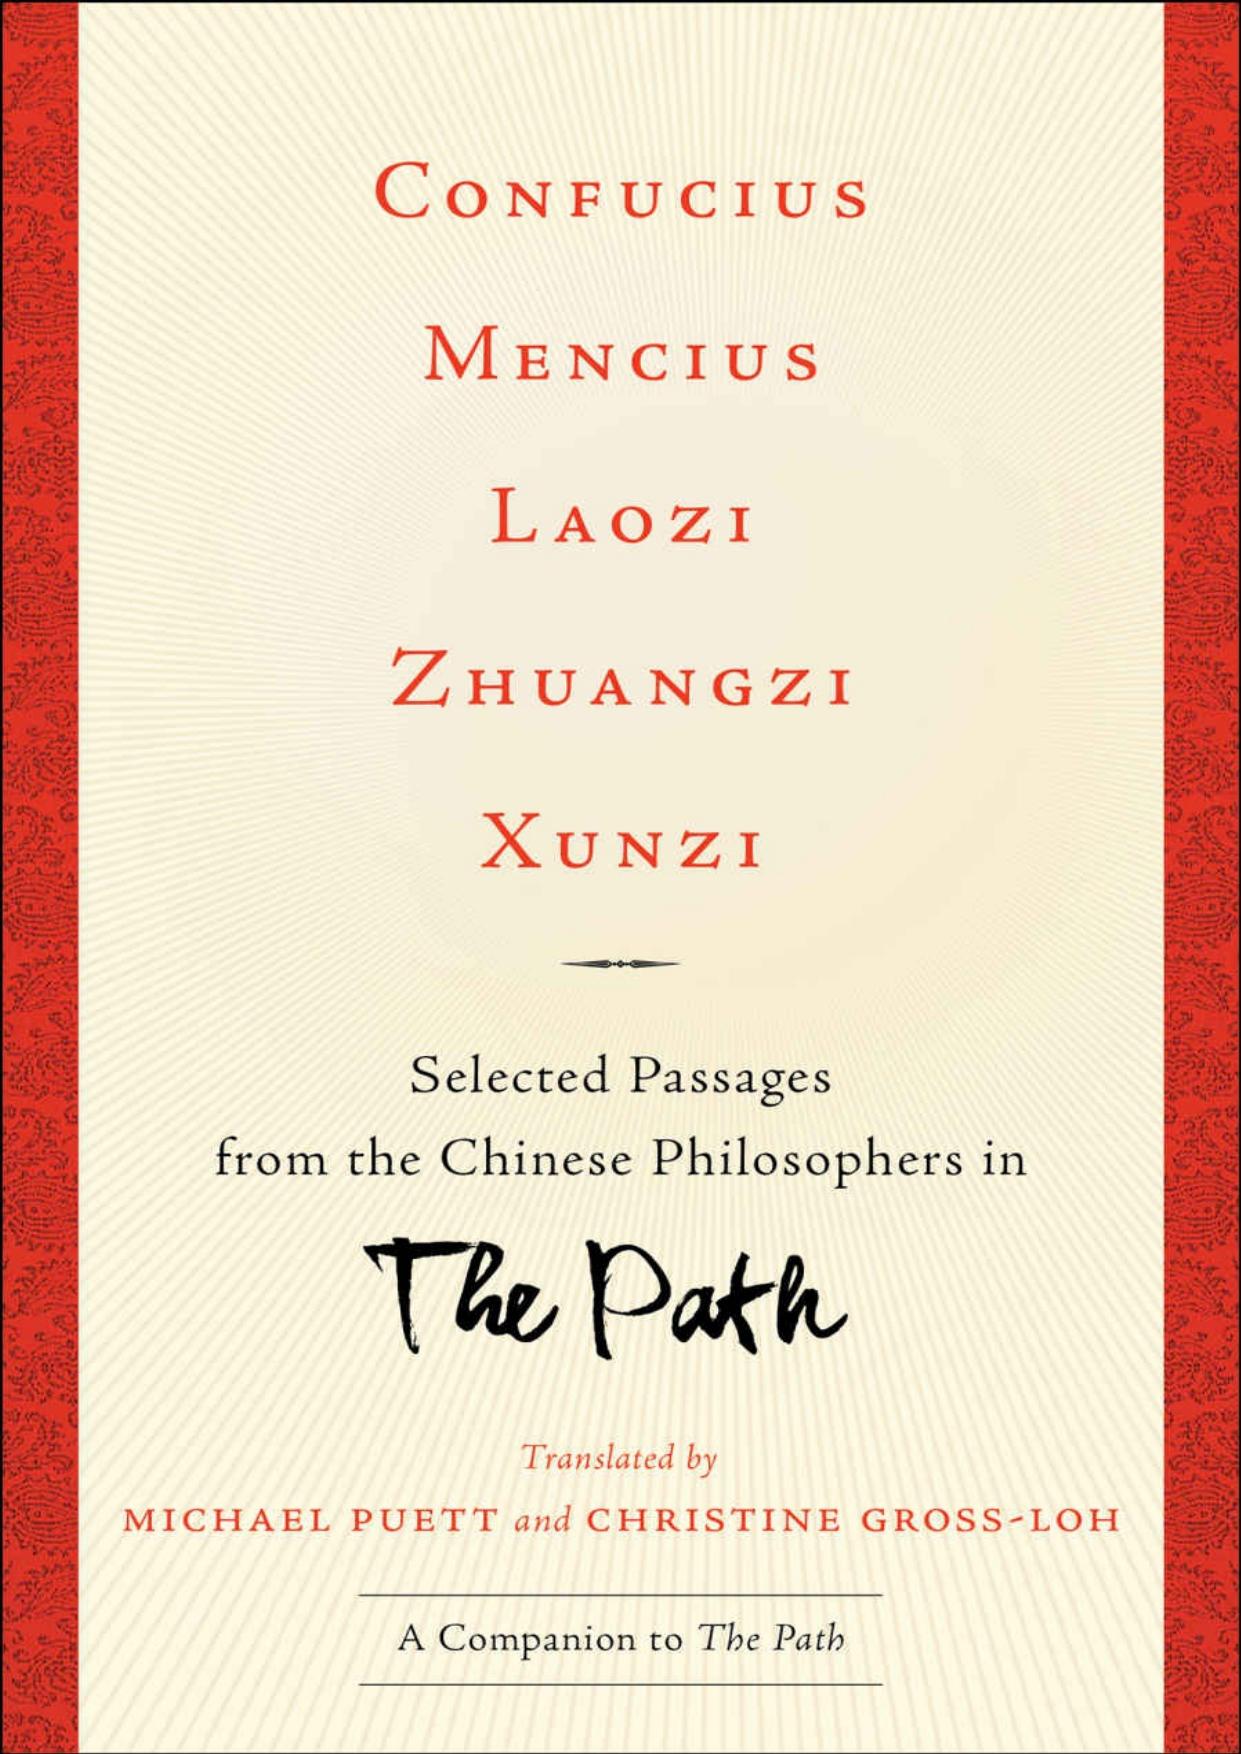 Confucius, Mencius, Laozi, Zhuangzi, Xunzi: Selected Passages from the Chinese Philosophers in The Path